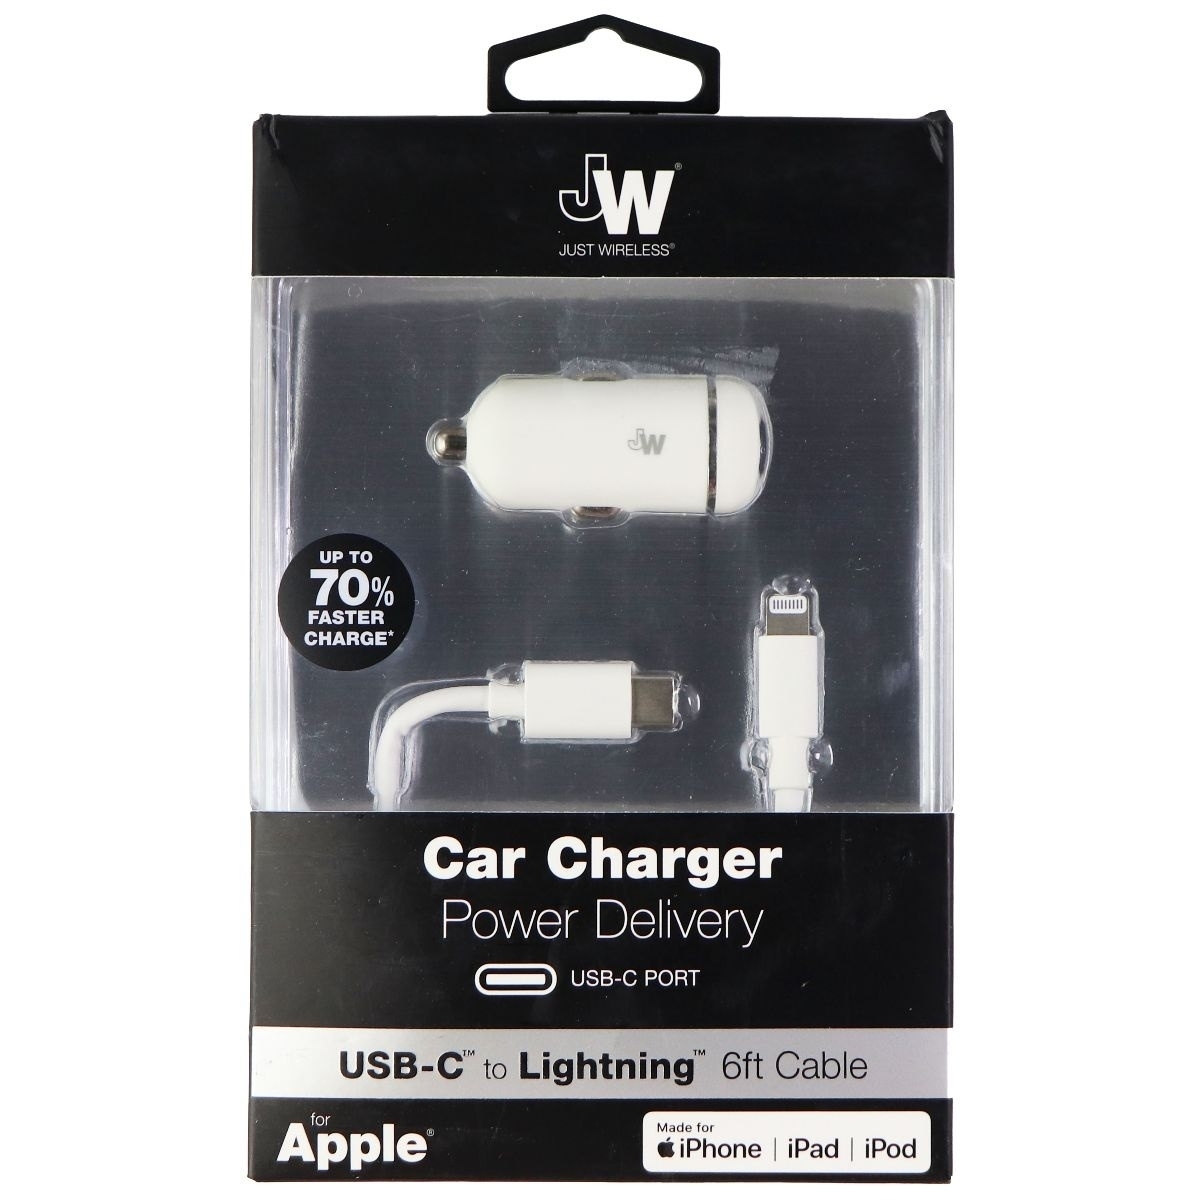 Just Wireless - Vehicle Charger - White